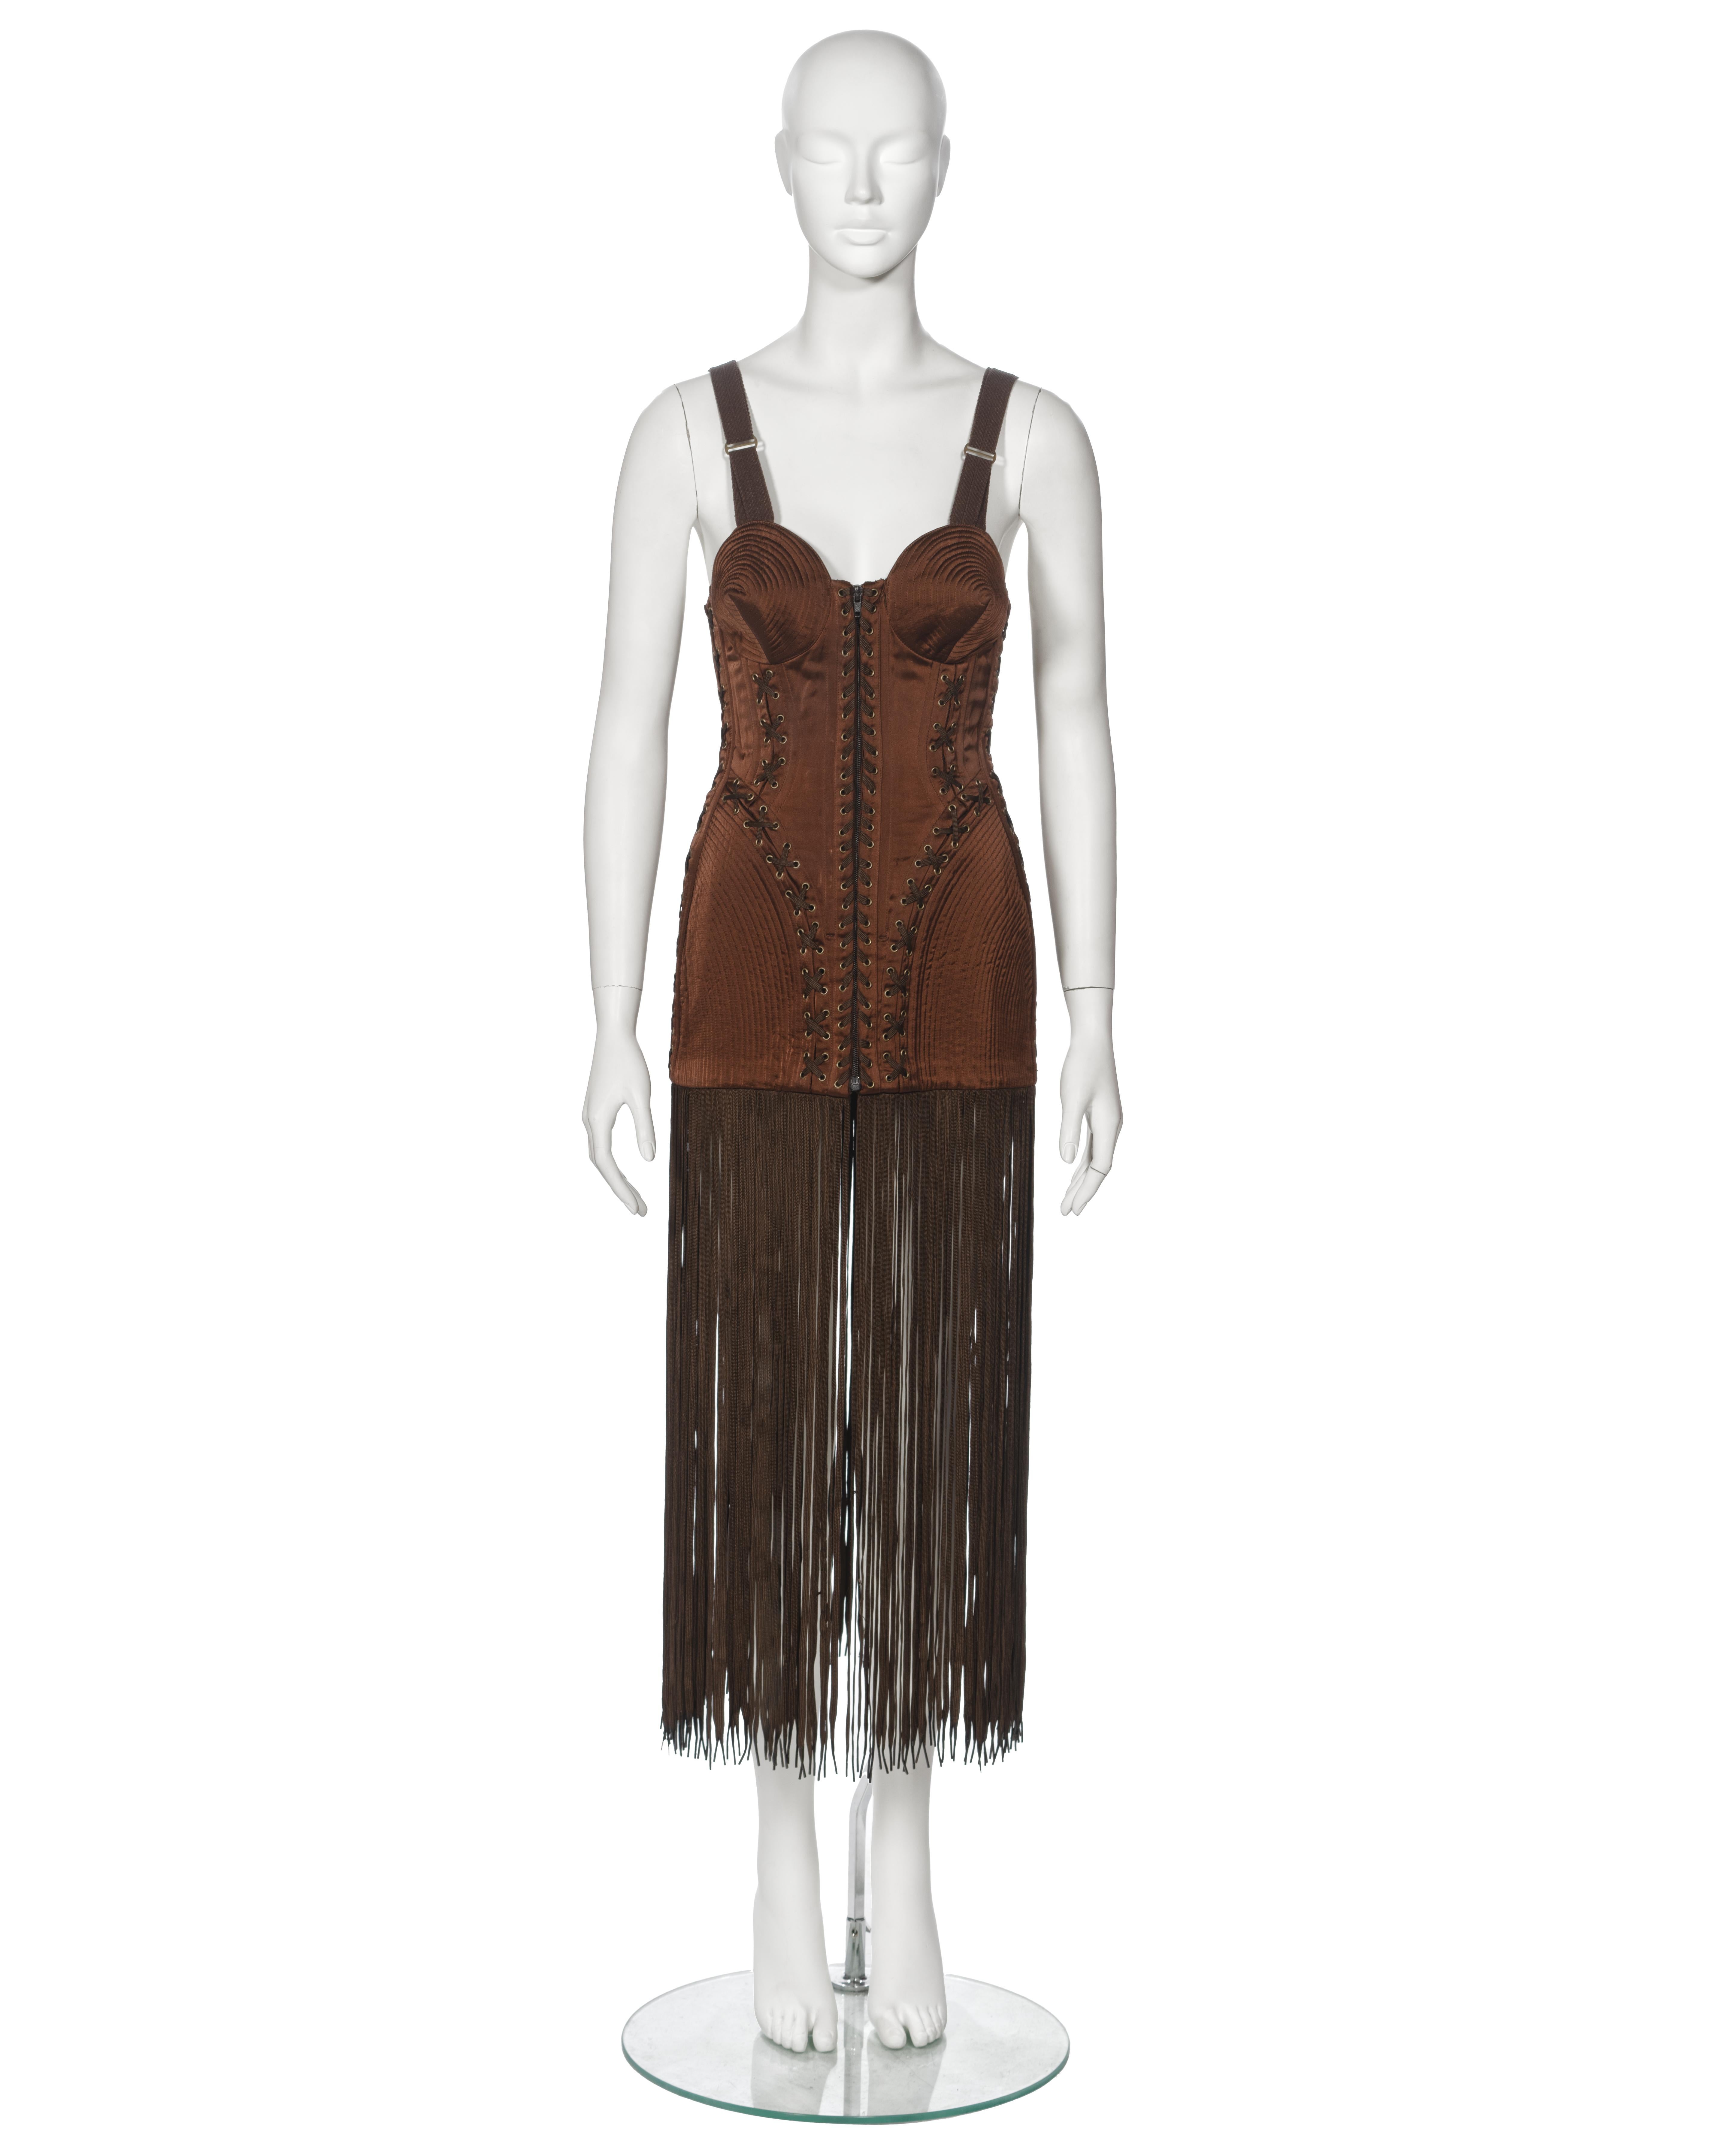 ▪ Archival Jean Paul Gaultier Corset Dress
▪ Fall-Winter 1990
▪ Sold by One of a Kind Archive
▪ Museum Grade
▪ Constructed from chestnut brown satin 
▪ Conically embroidered breast cups
▪ Quilted top-stitched hip panels
▪ Criss-cross laced corsetry